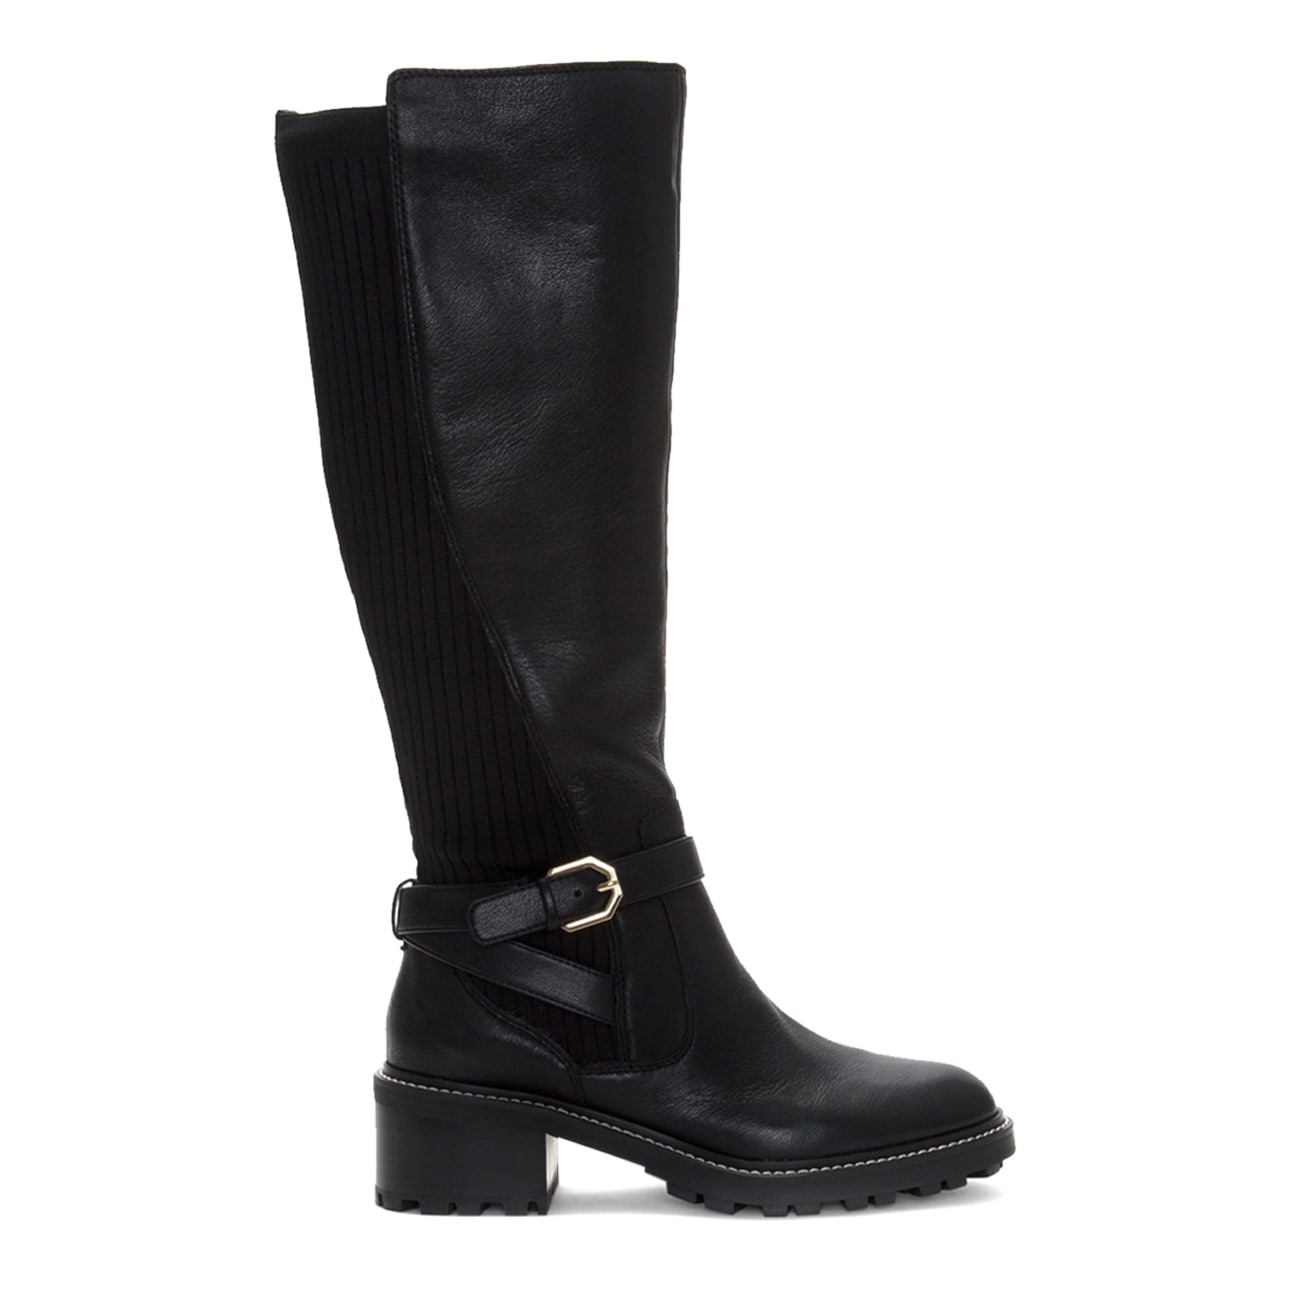 Vince Camuto Kestala Riding Knee High Boot | DSW Canada